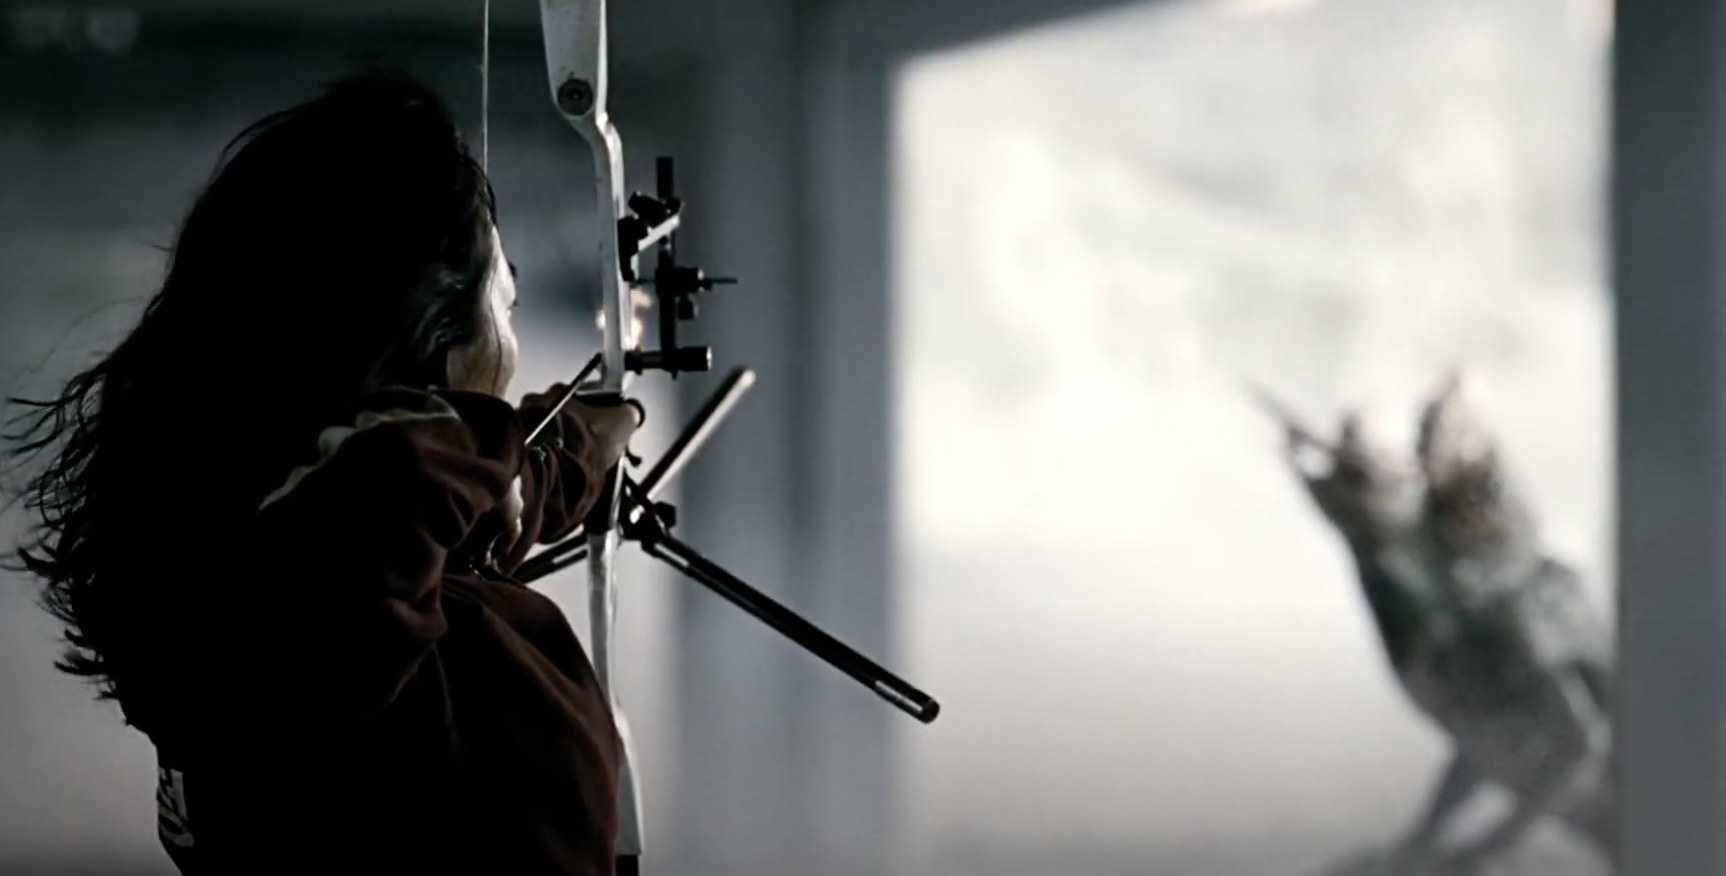 Bae Doona character aiming at the monster with bow and arrow in The Host